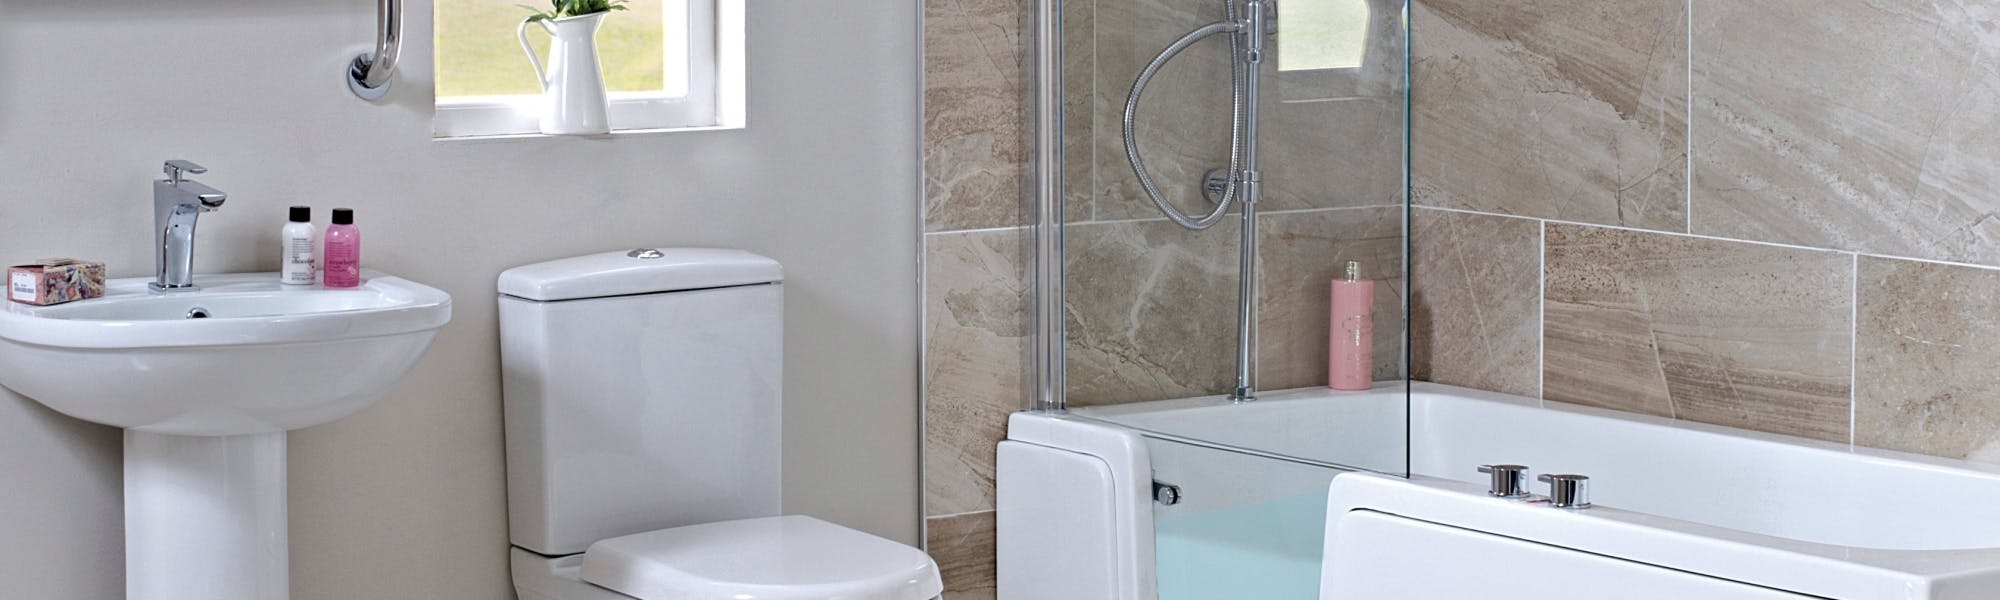 We design, supply & install easy access bathrooms and walk-in baths.